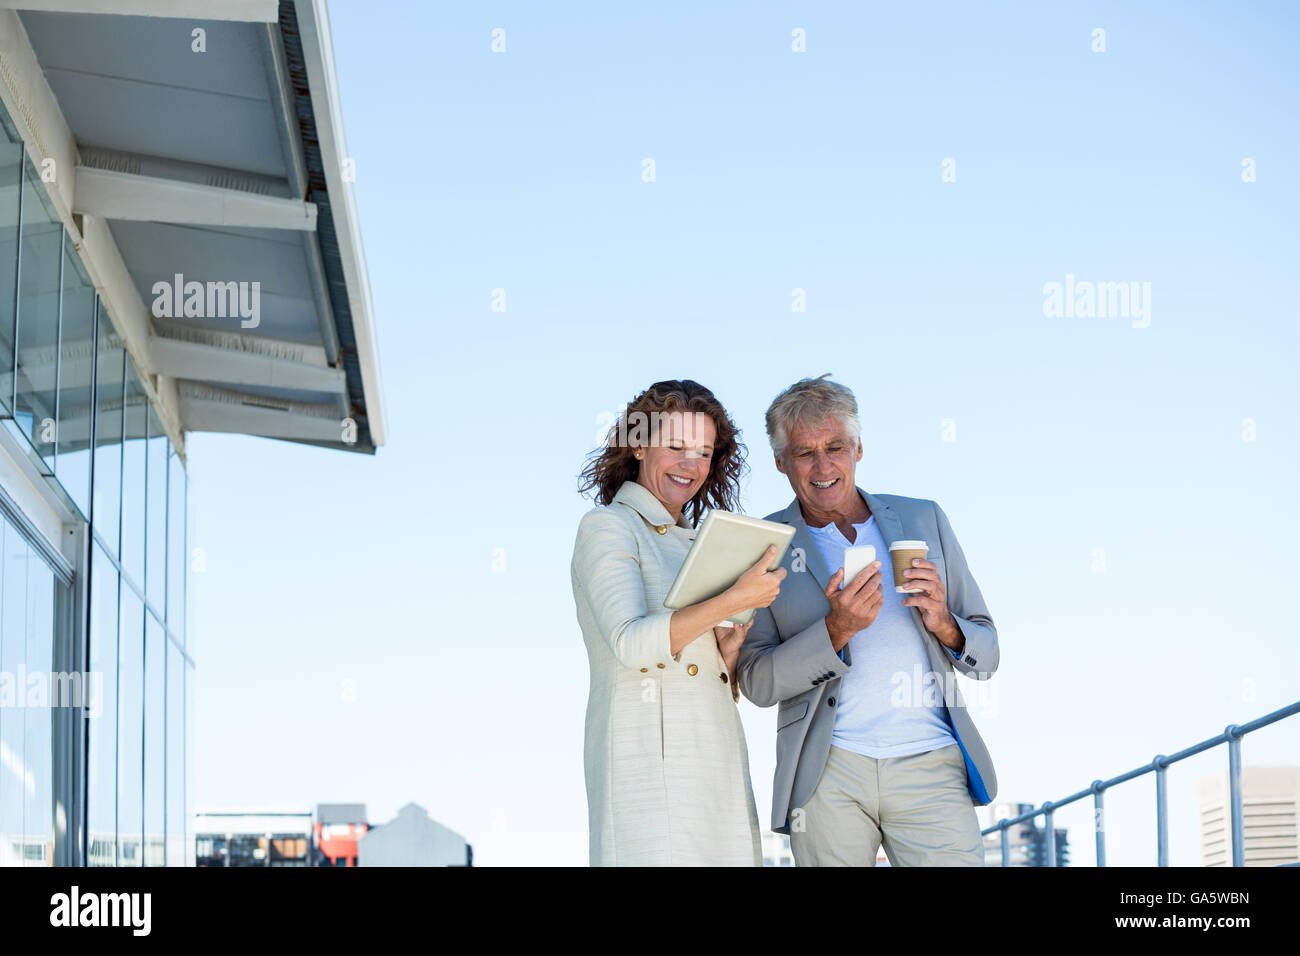 Happy couple using digital tablet and mobile phone Stock Photo